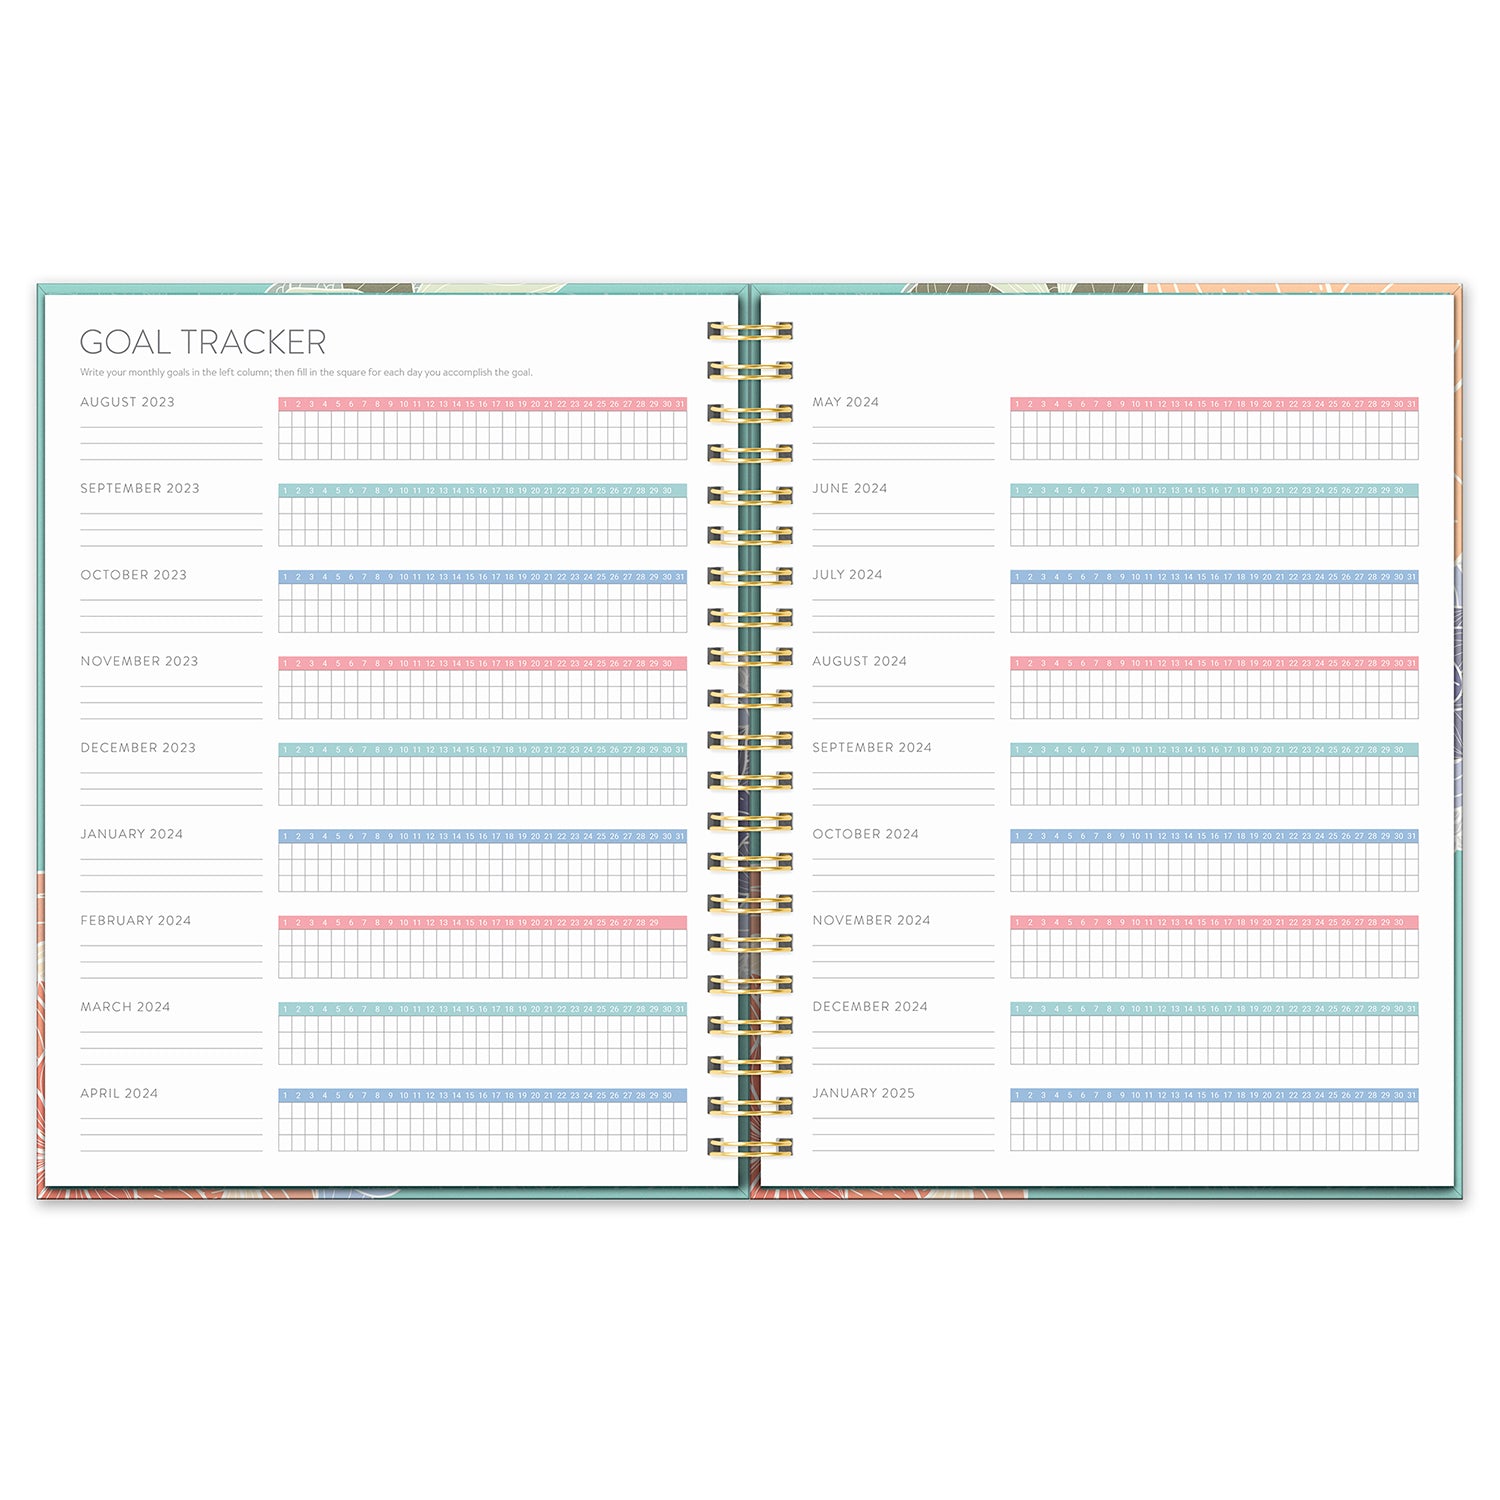 2024 Retro Flowers - XL Spiral Monthly & Bi-Weekly Diary/Planner